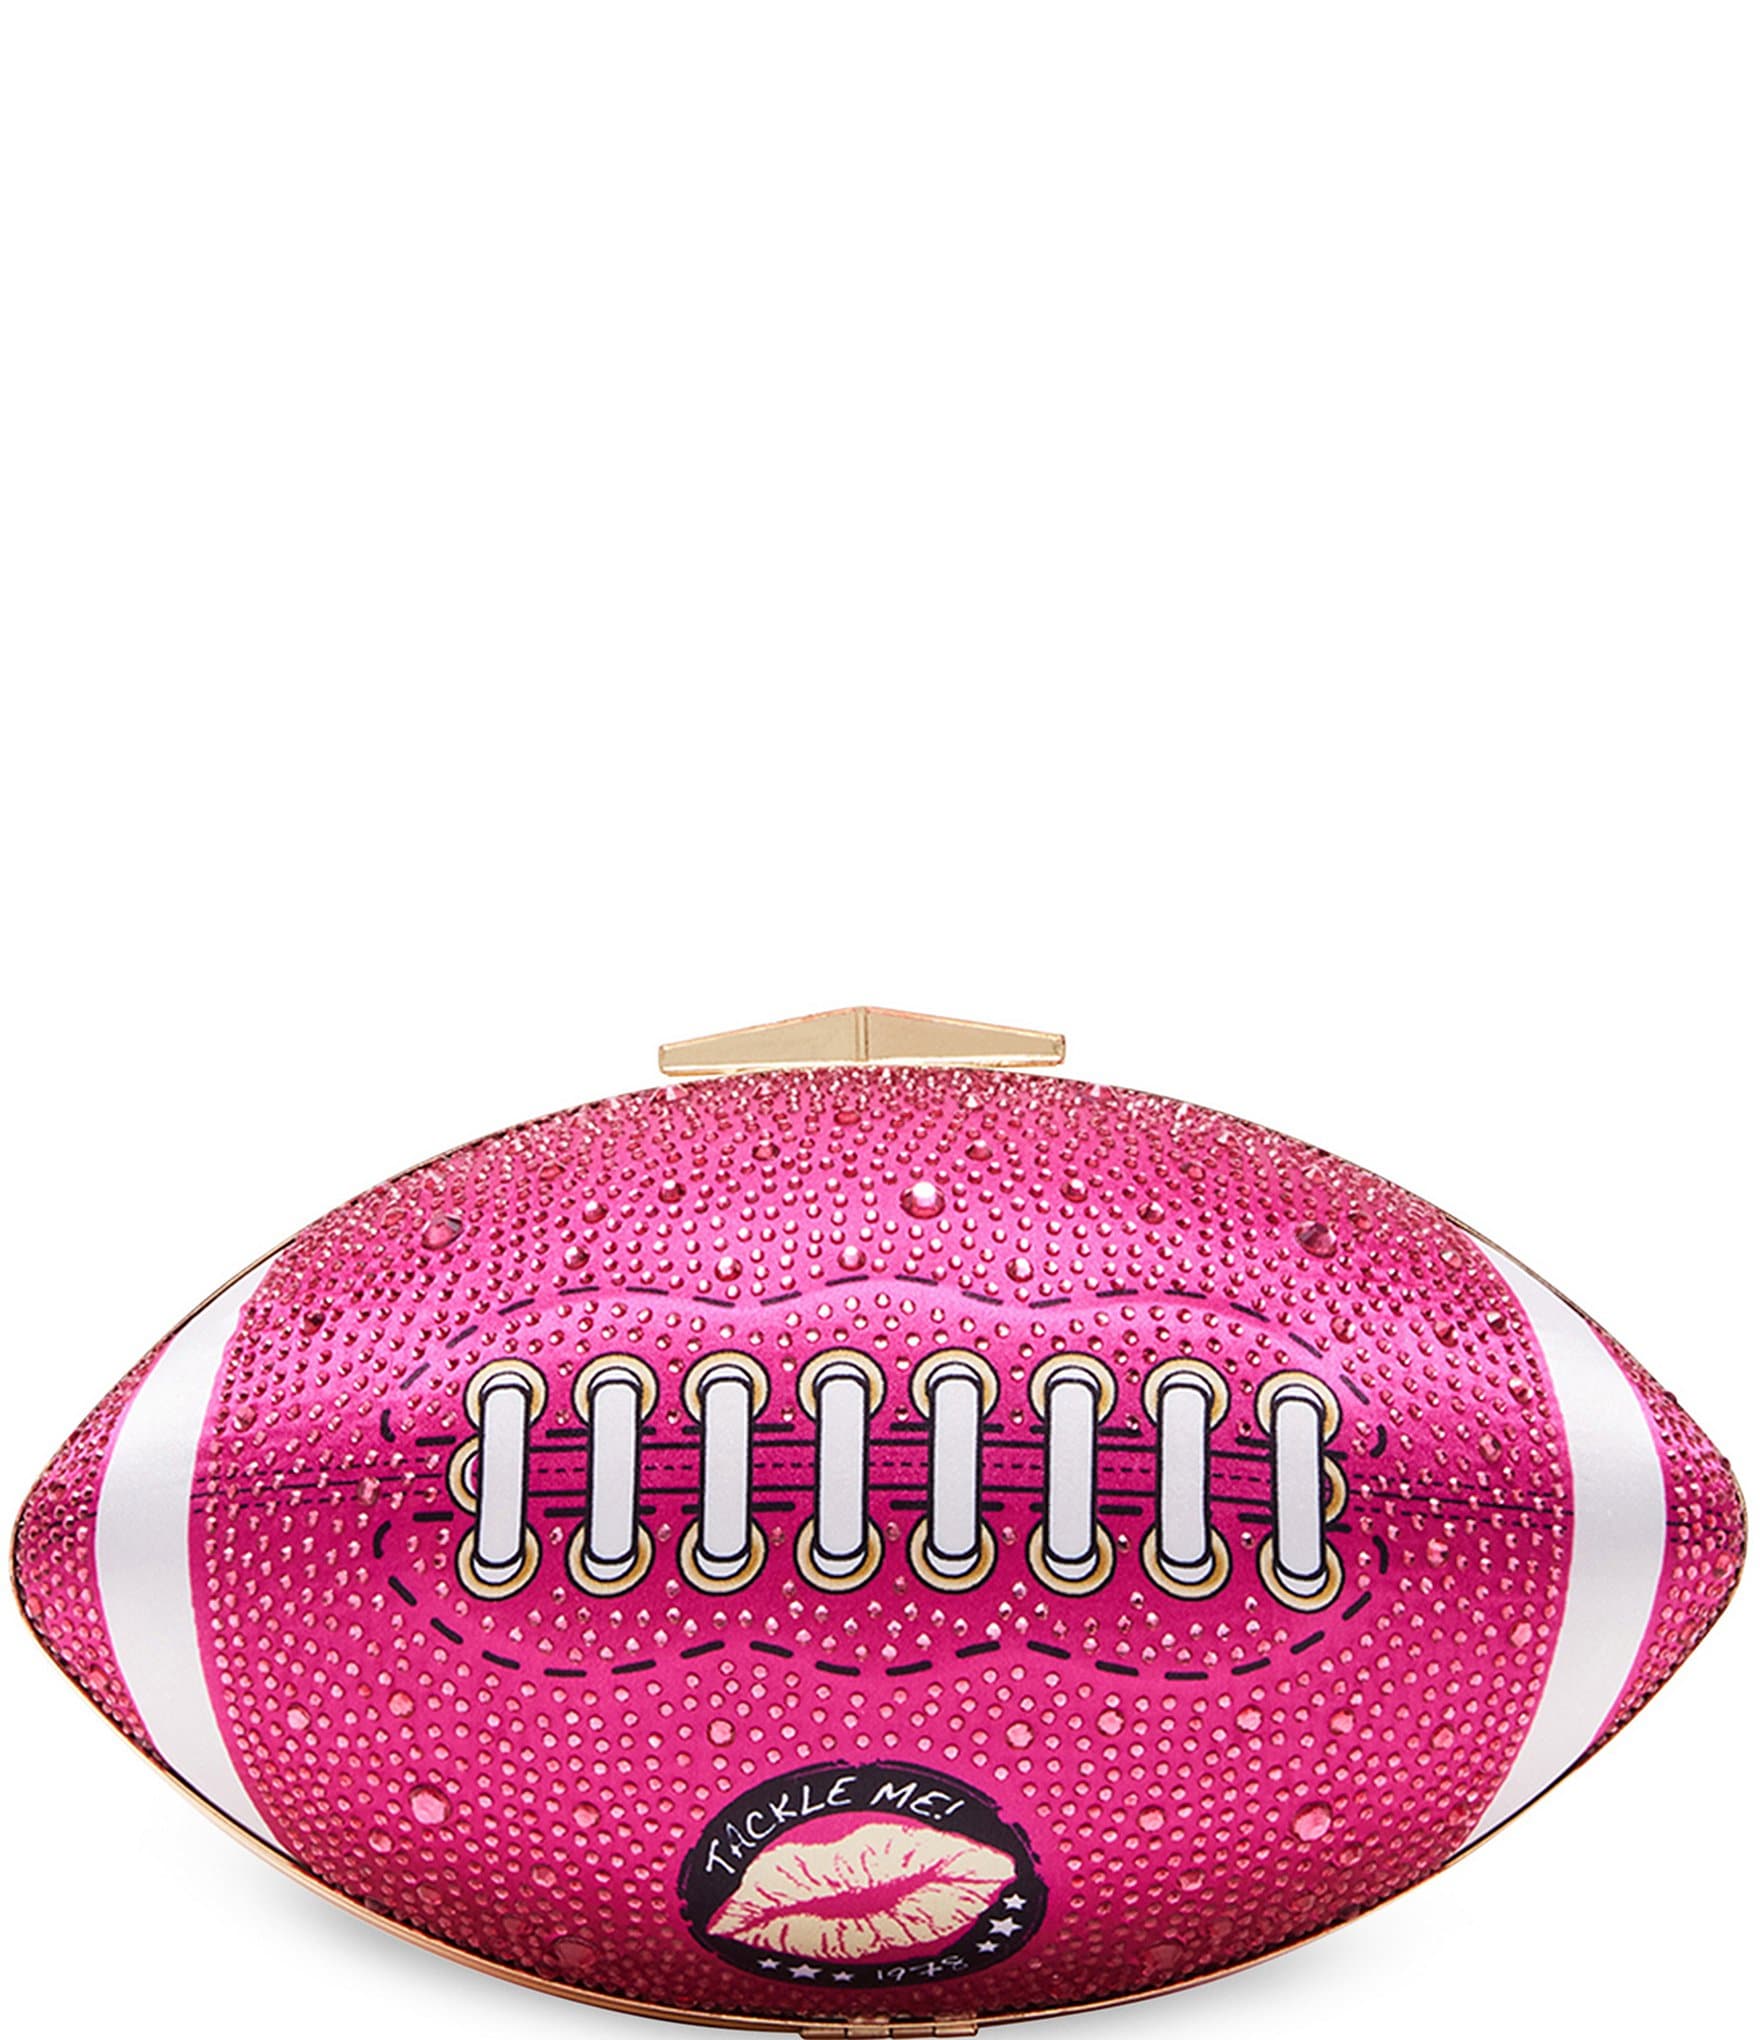 Is this crystal-encrusted football the Super Bowl 2019 of bags?